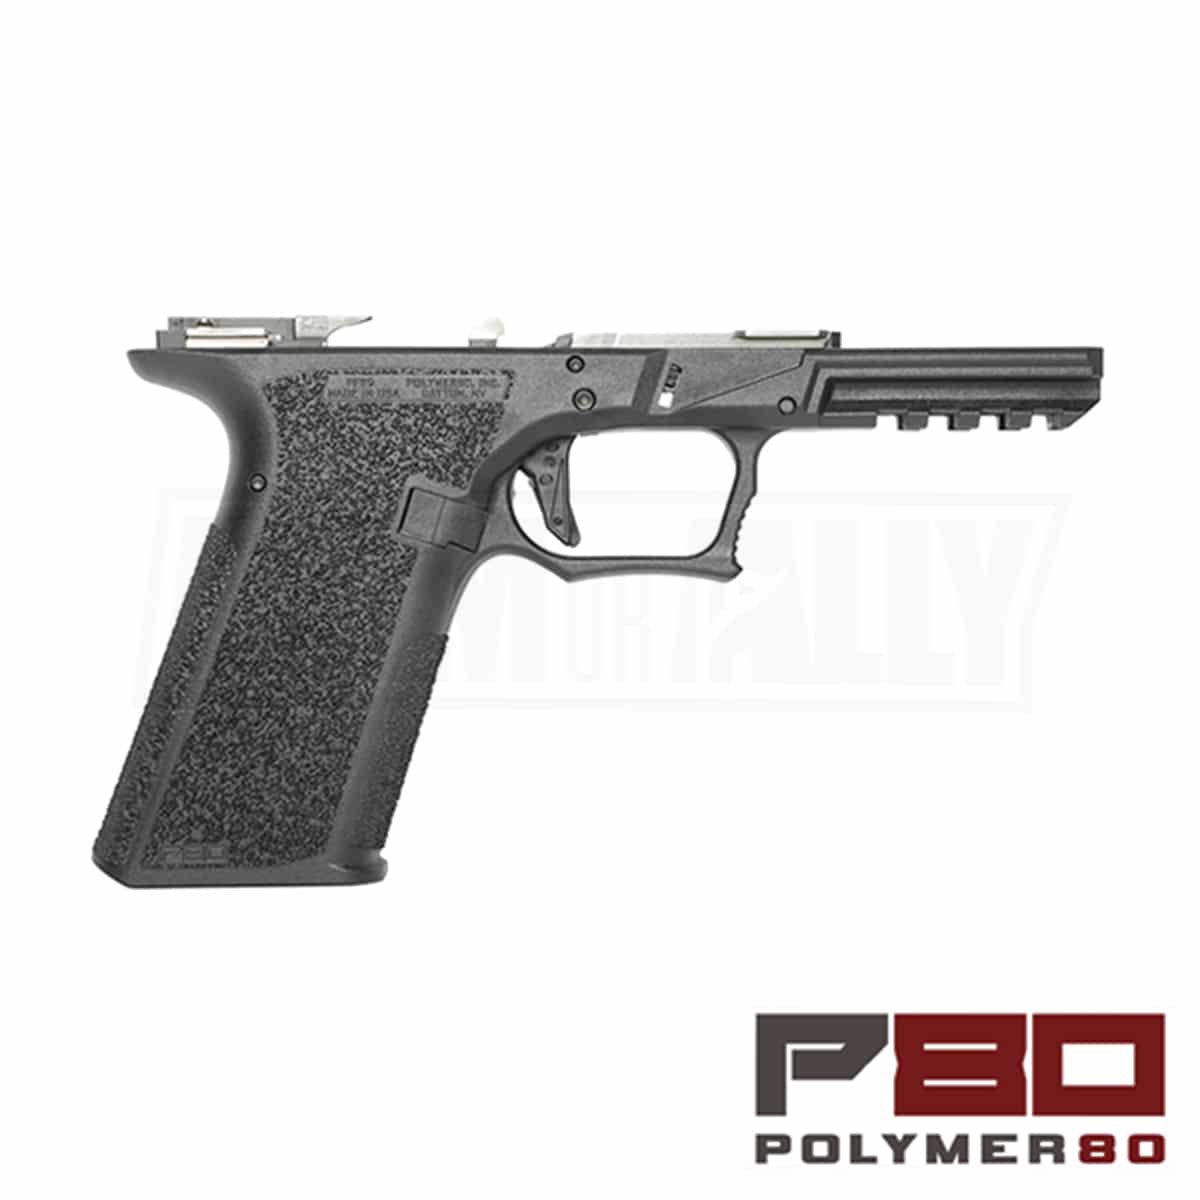 Featured image for “Polymer80 - PFSC9 Serialized Sub Compact Pistol Frame”